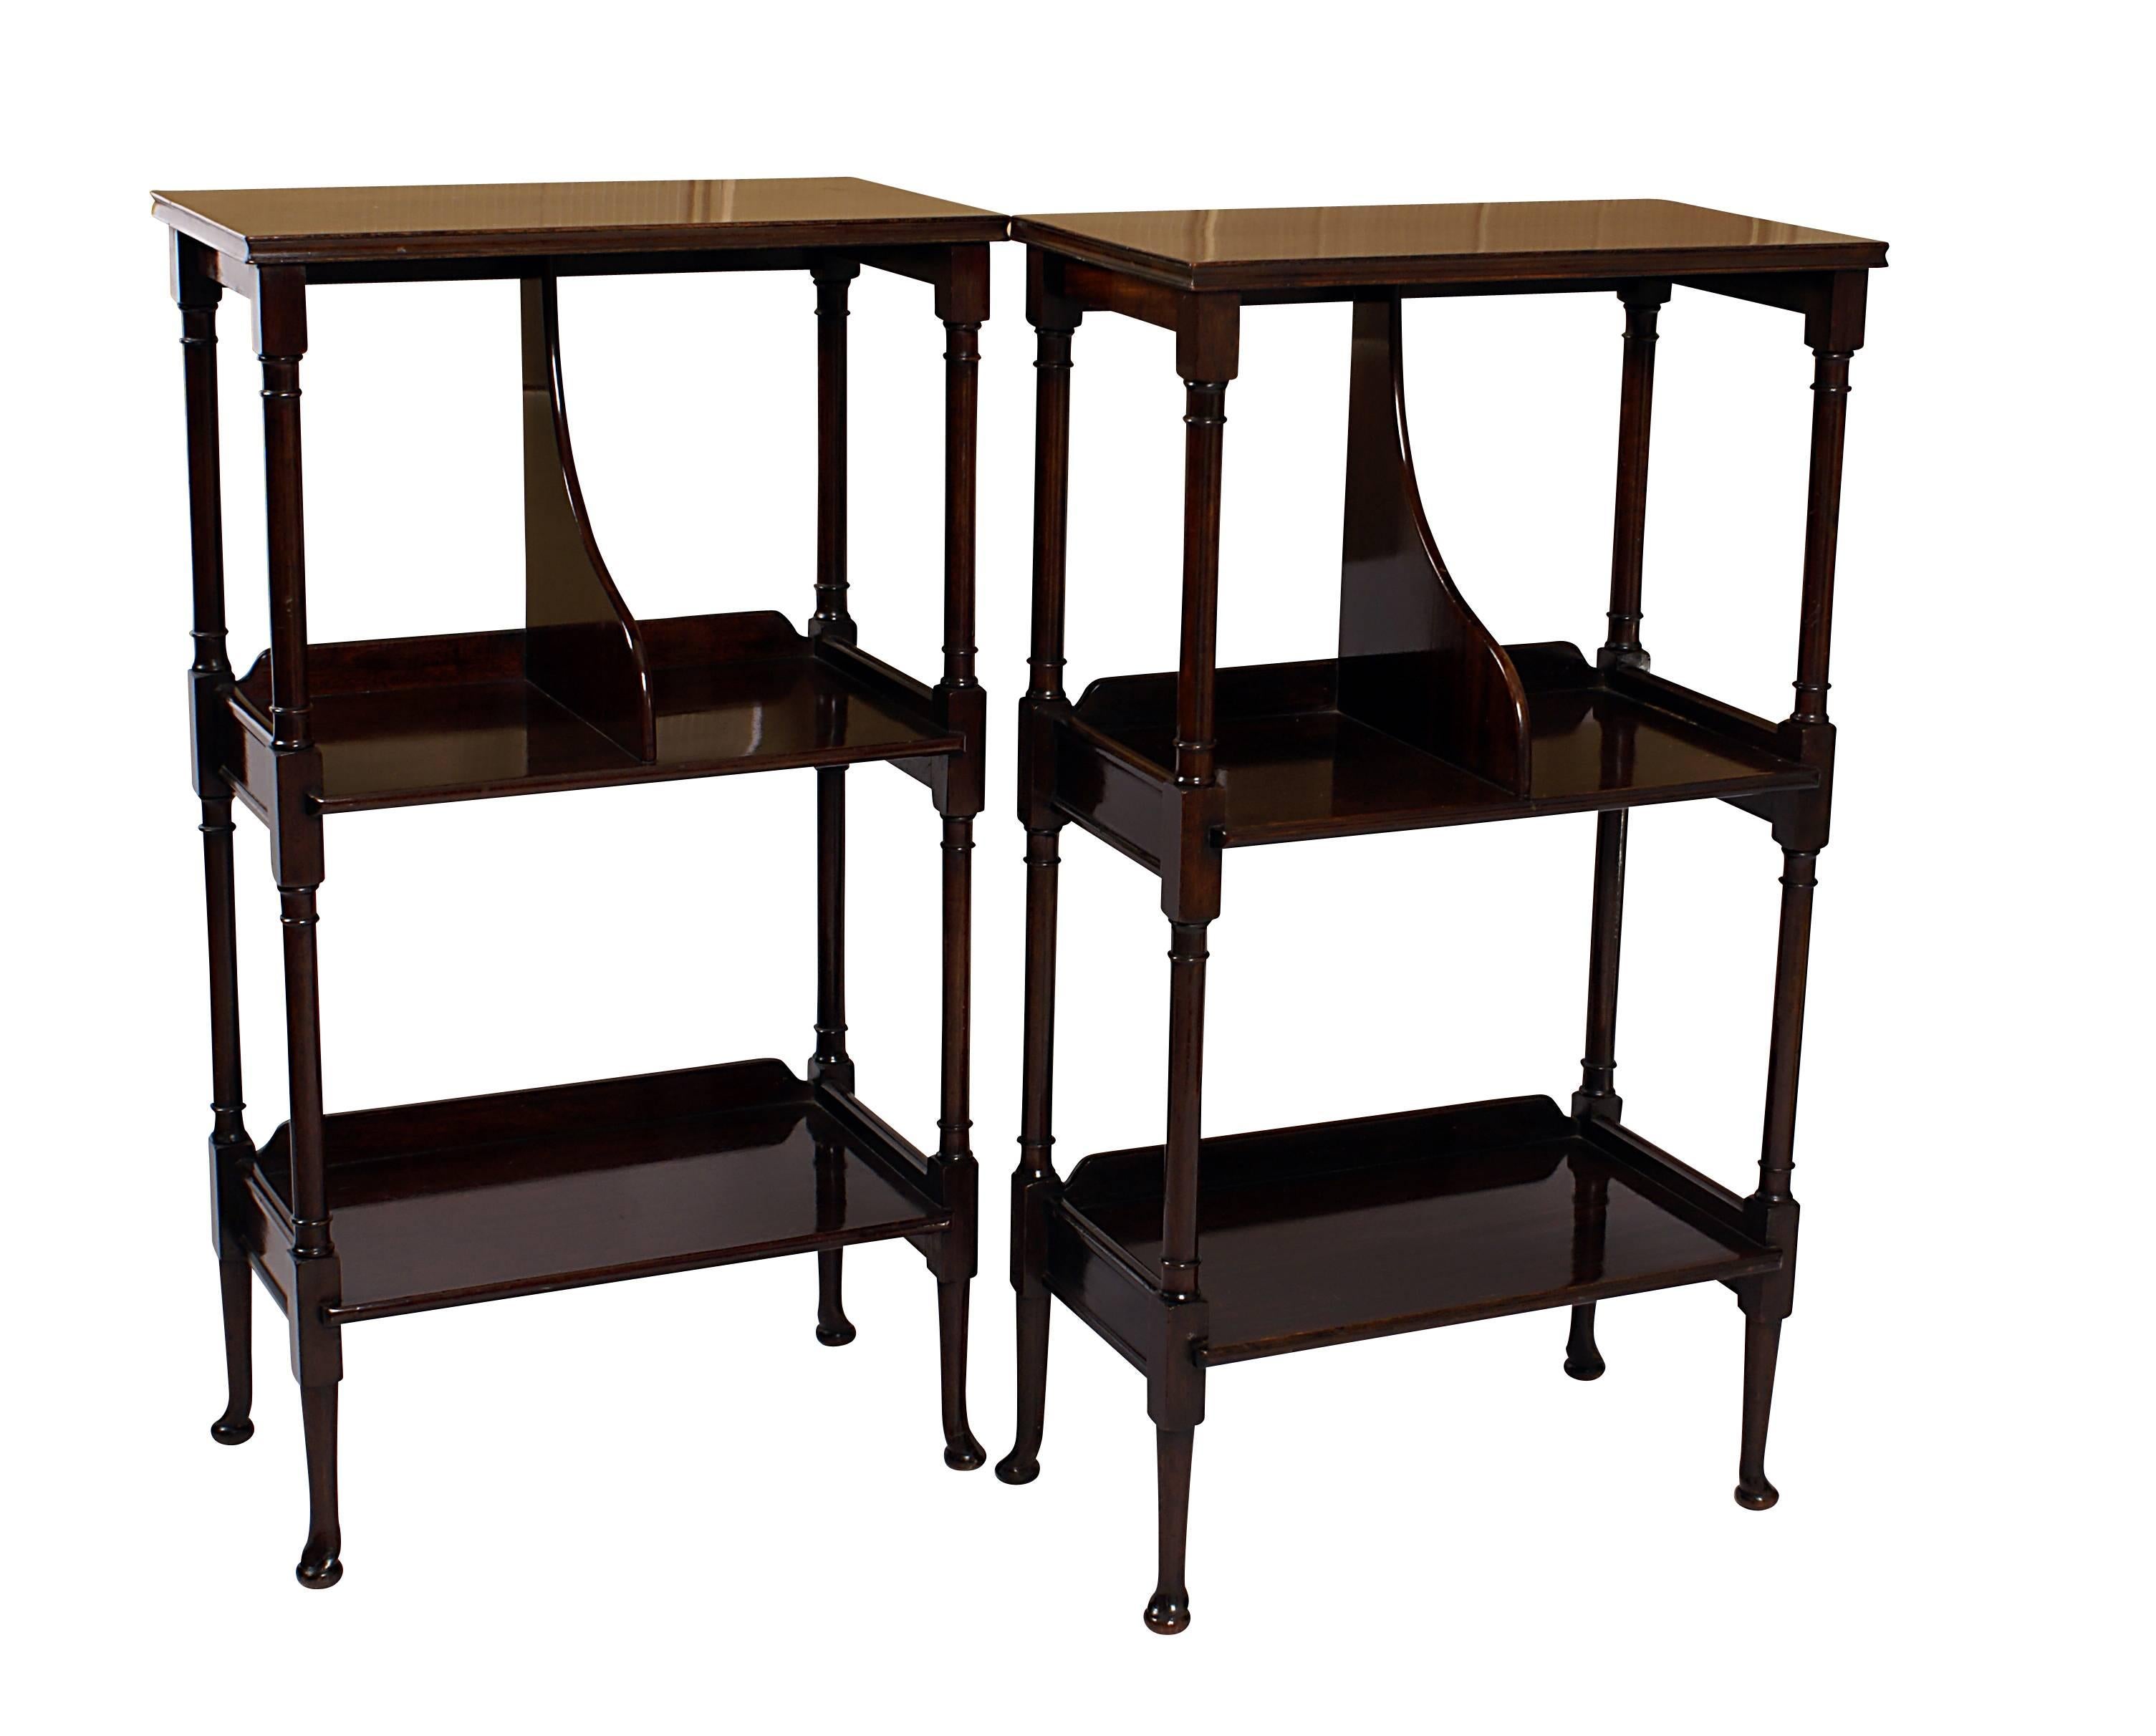 This pair of tables or shelves is a rarity. The design incorporates part turned and tapered legs ending in delicate pad feet. The shelves and tops are well figured flame mahogany. The shelves have been stabilized and strengthened by the addition of